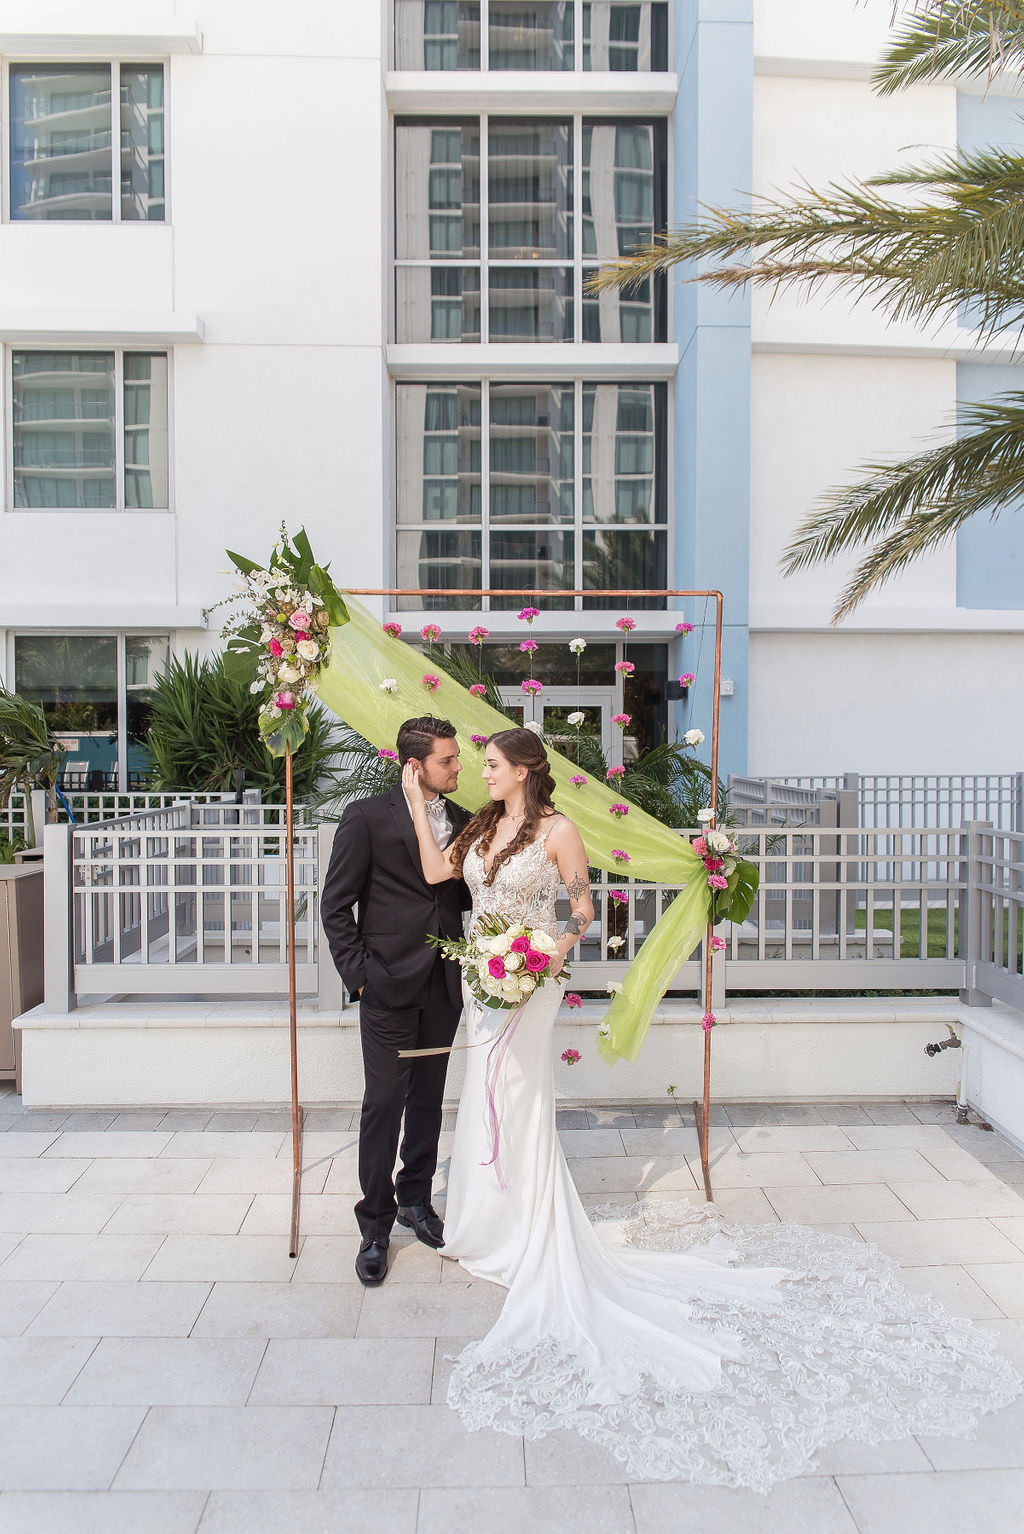 Modern Bride and Groom Wedding Portrait, Colorful Tropical Wedding Ceremony Decor, Copper Arch, Fuchsia Pink and White Hanging Carnations, Lime Green Draping, Pink and Ivory Roses, Monstera Palm Leaf Floral Arrangement | Tampa Bay Wedding Photographer Kristen Marie Photography | Hotel Wedding Venue Hyatt Place Downtown St. Pete | Wedding Florist Brides N Blooms | Wedding Attire Nikki's Glitz and Glam Boutique | Outside the Box Event Rentals | Wedding Hair and Makeup LDM Beauty Group